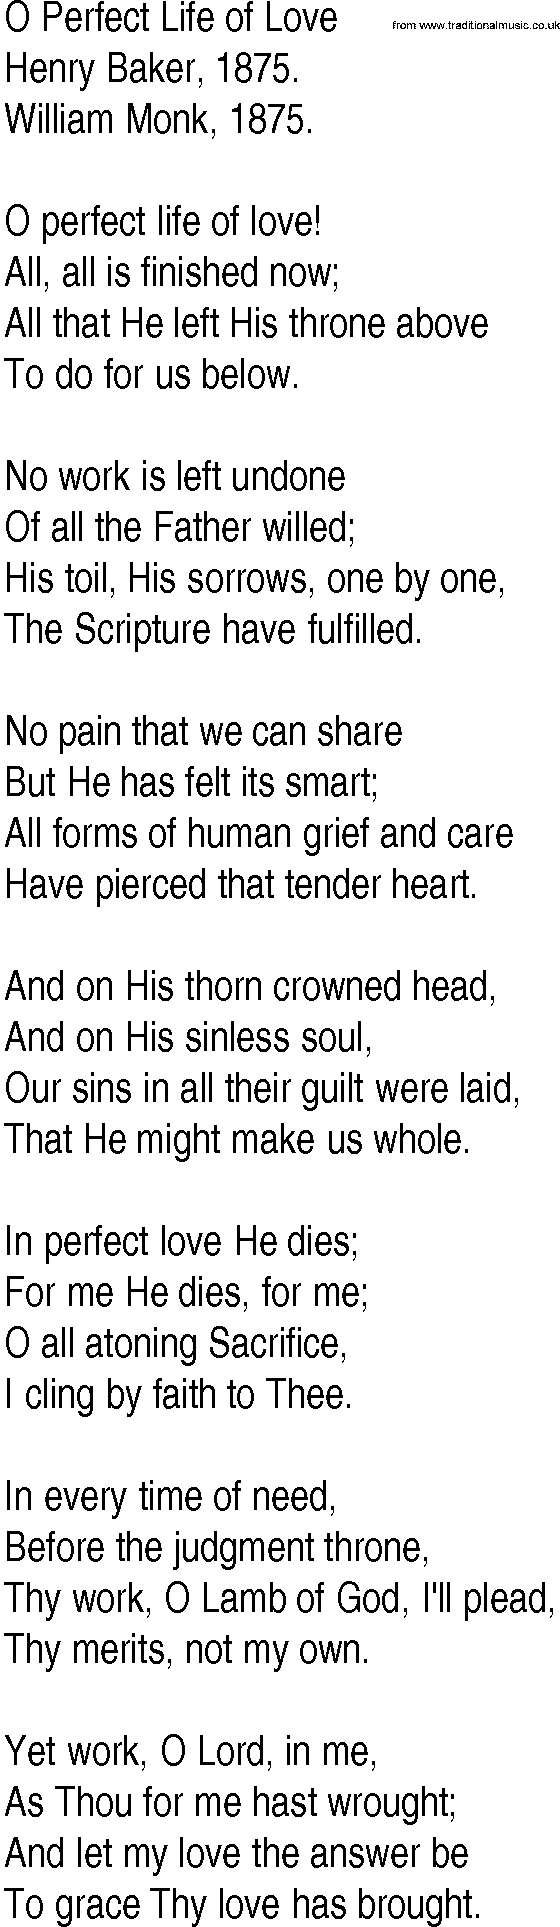 Hymn and Gospel Song: O Perfect Life of Love by Henry Baker lyrics